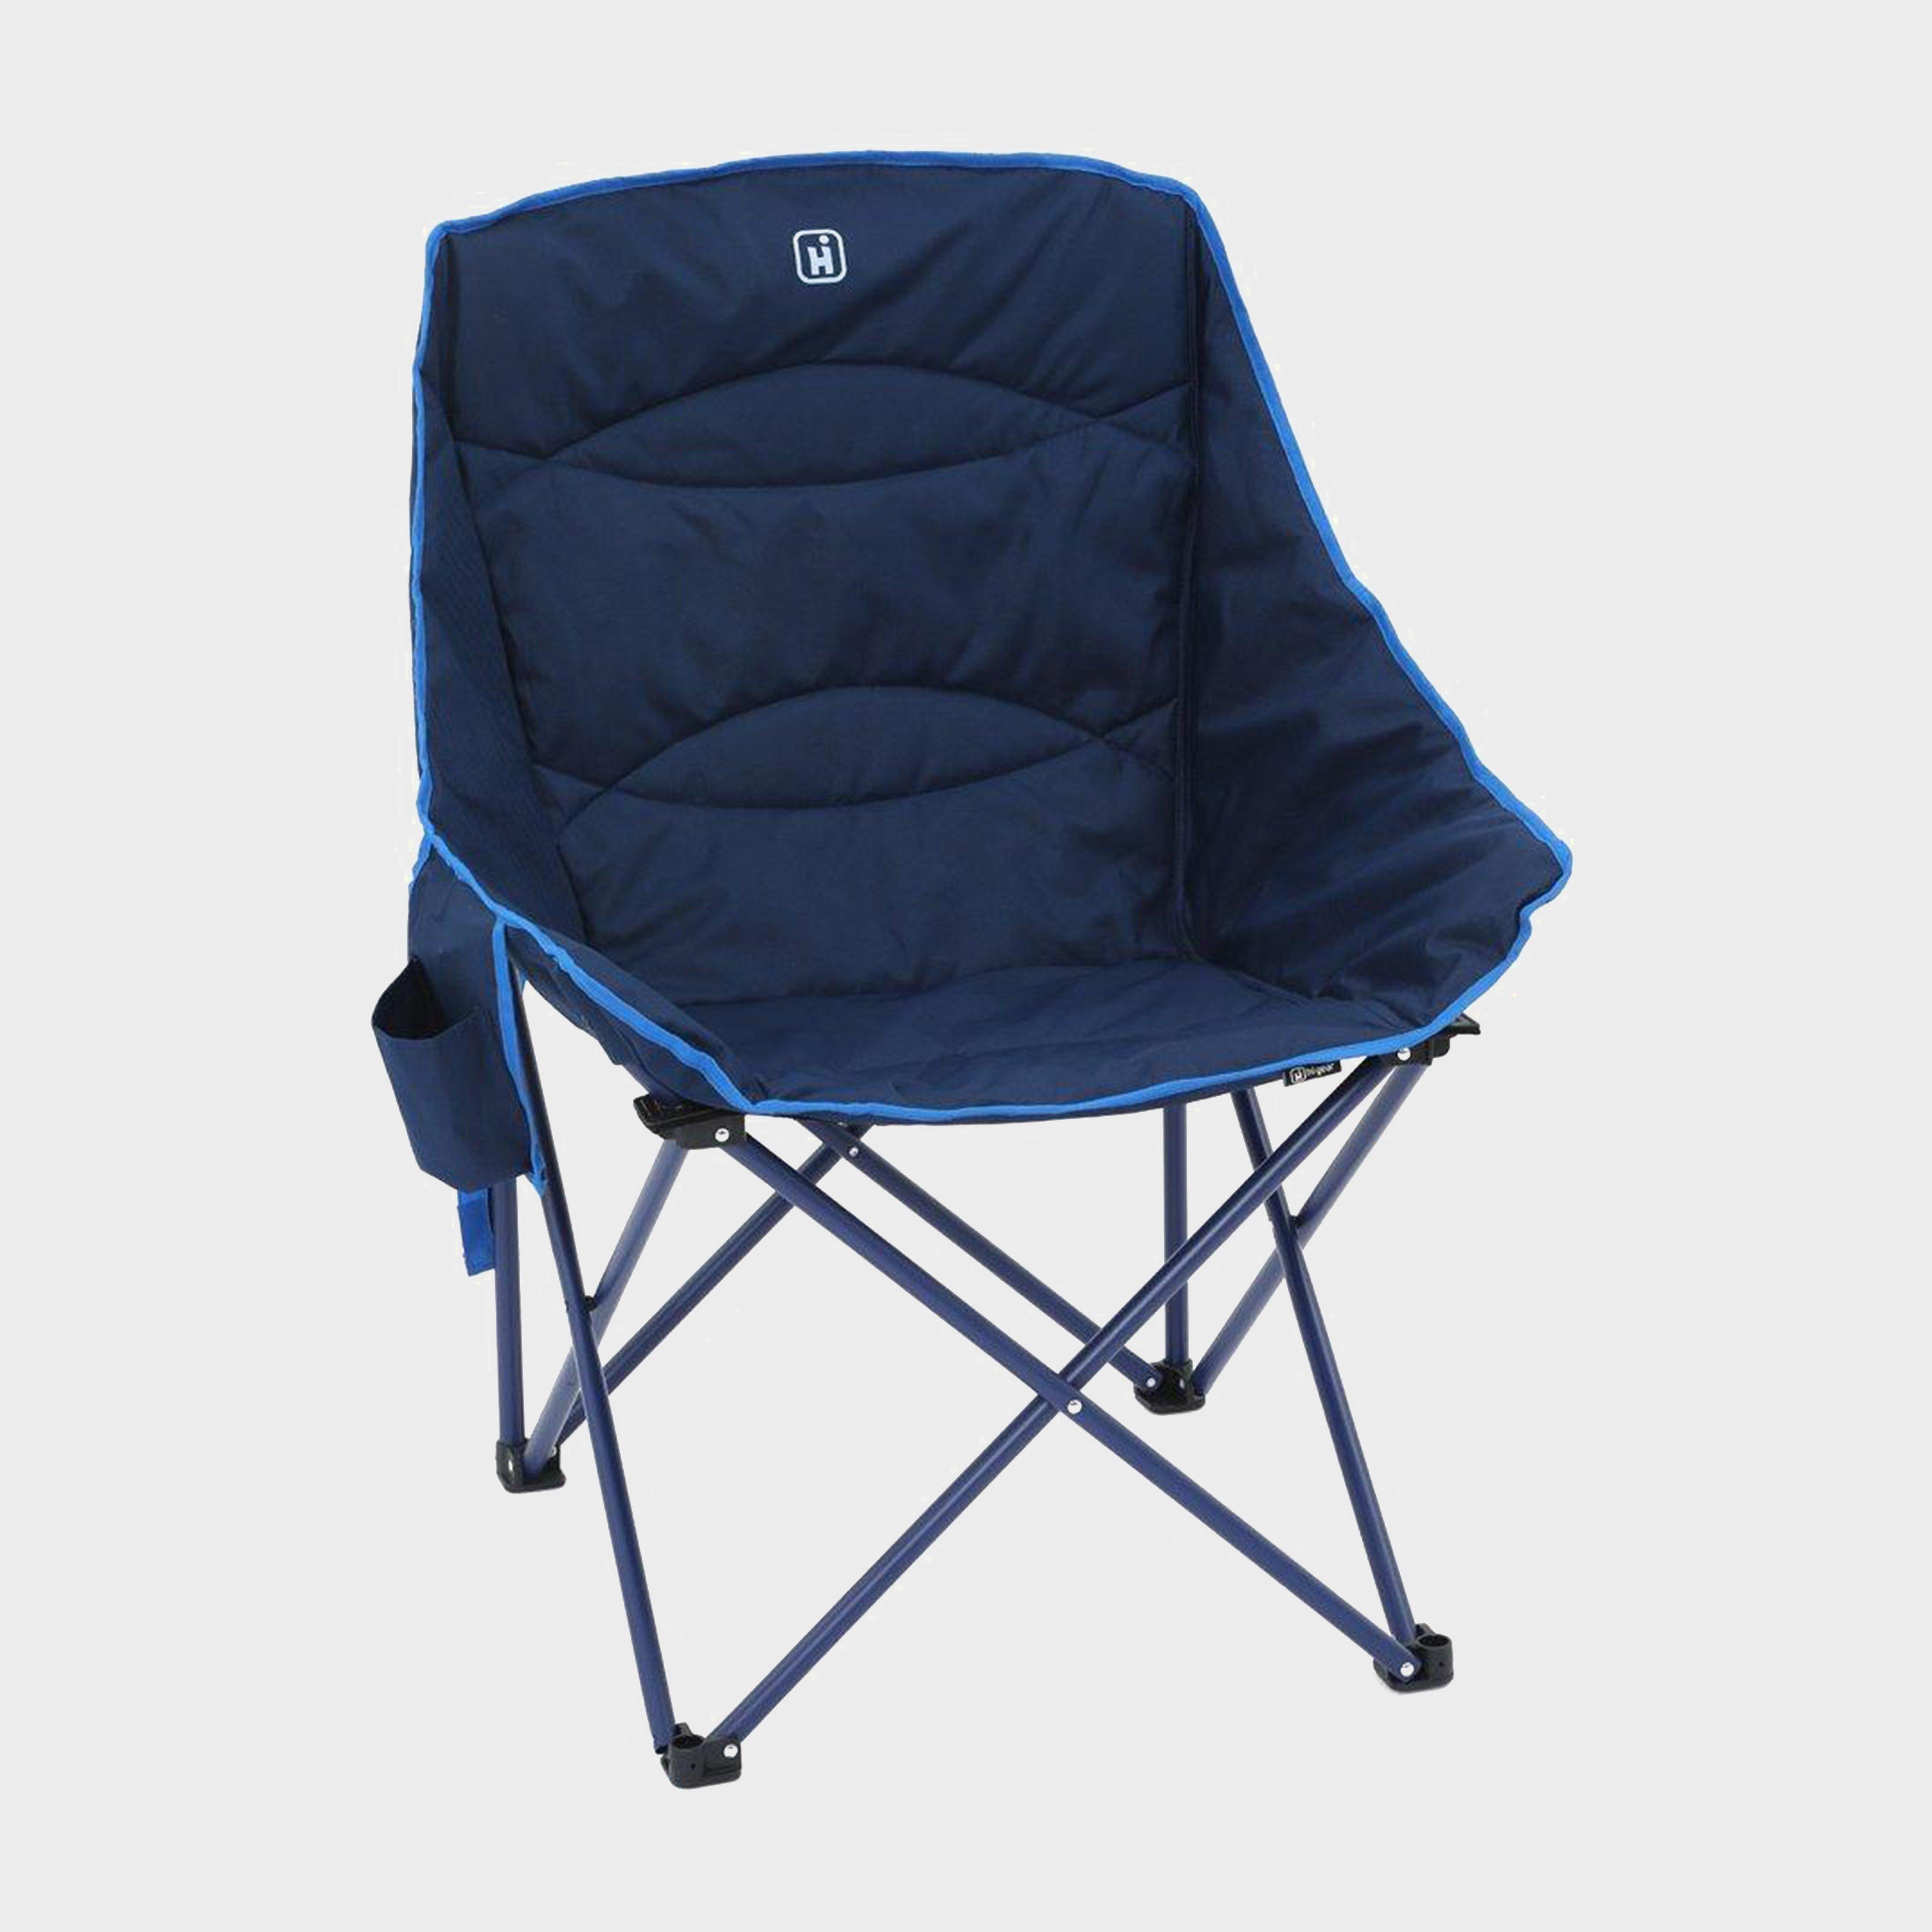 Hi-gear Vegas Xl Deluxe Quilted Chair